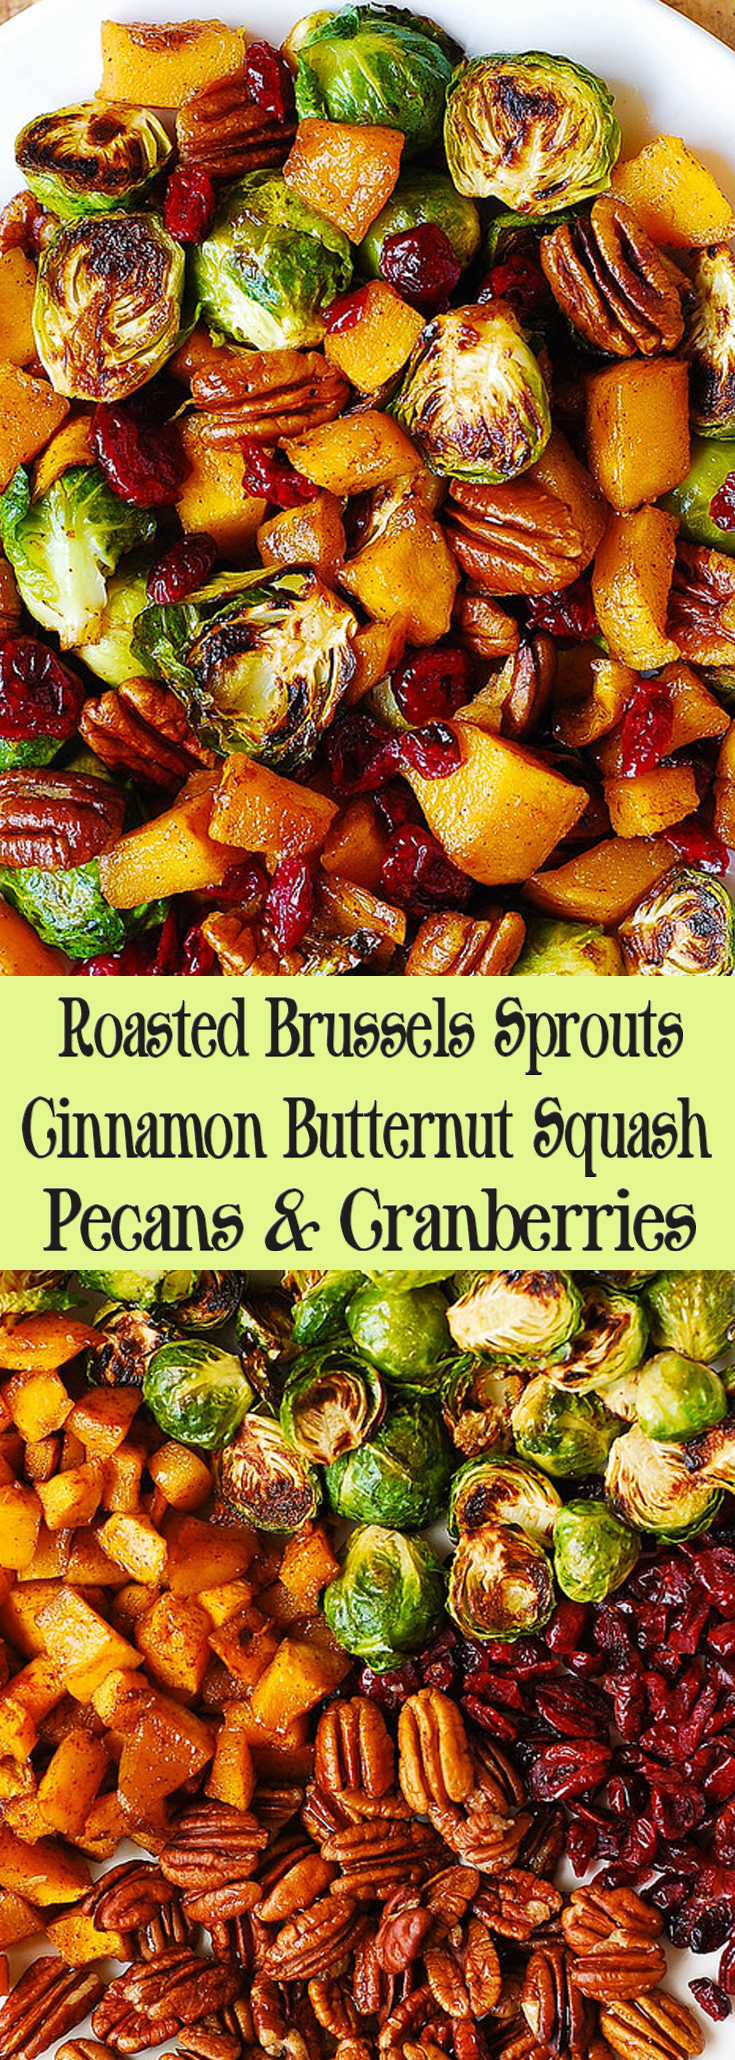 Roasted Brussels Sprouts Cinnamon Butternut Squash Pecans and Cranberries